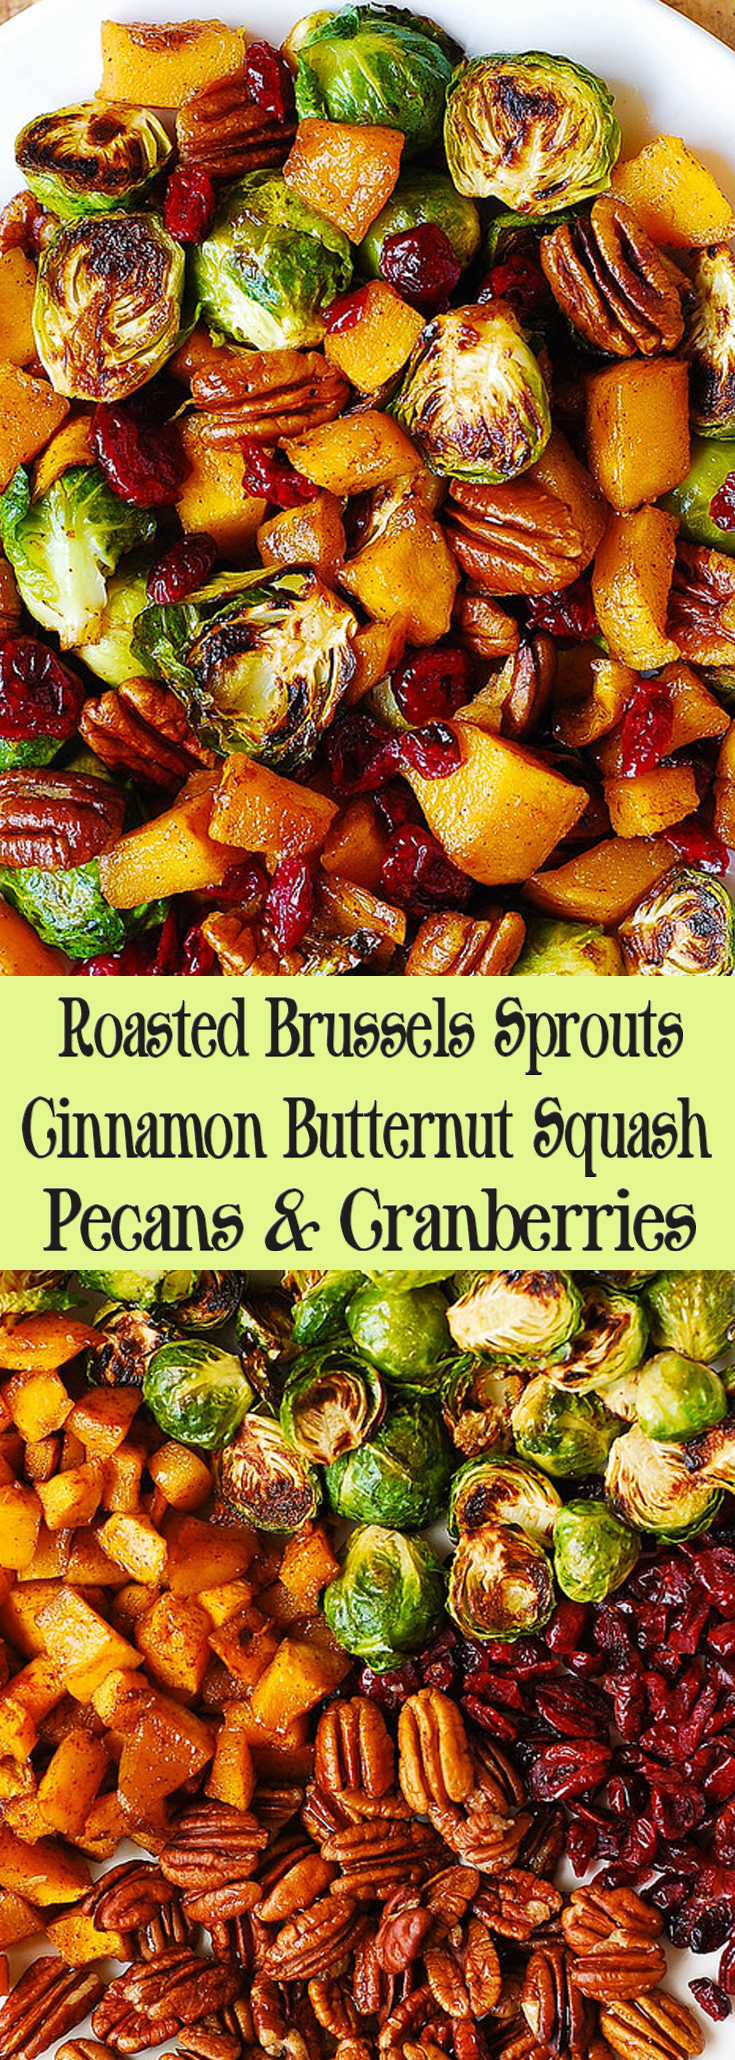 Roasted Brussels Sprouts Cinnamon Butternut Squash Pecans and Cranberries